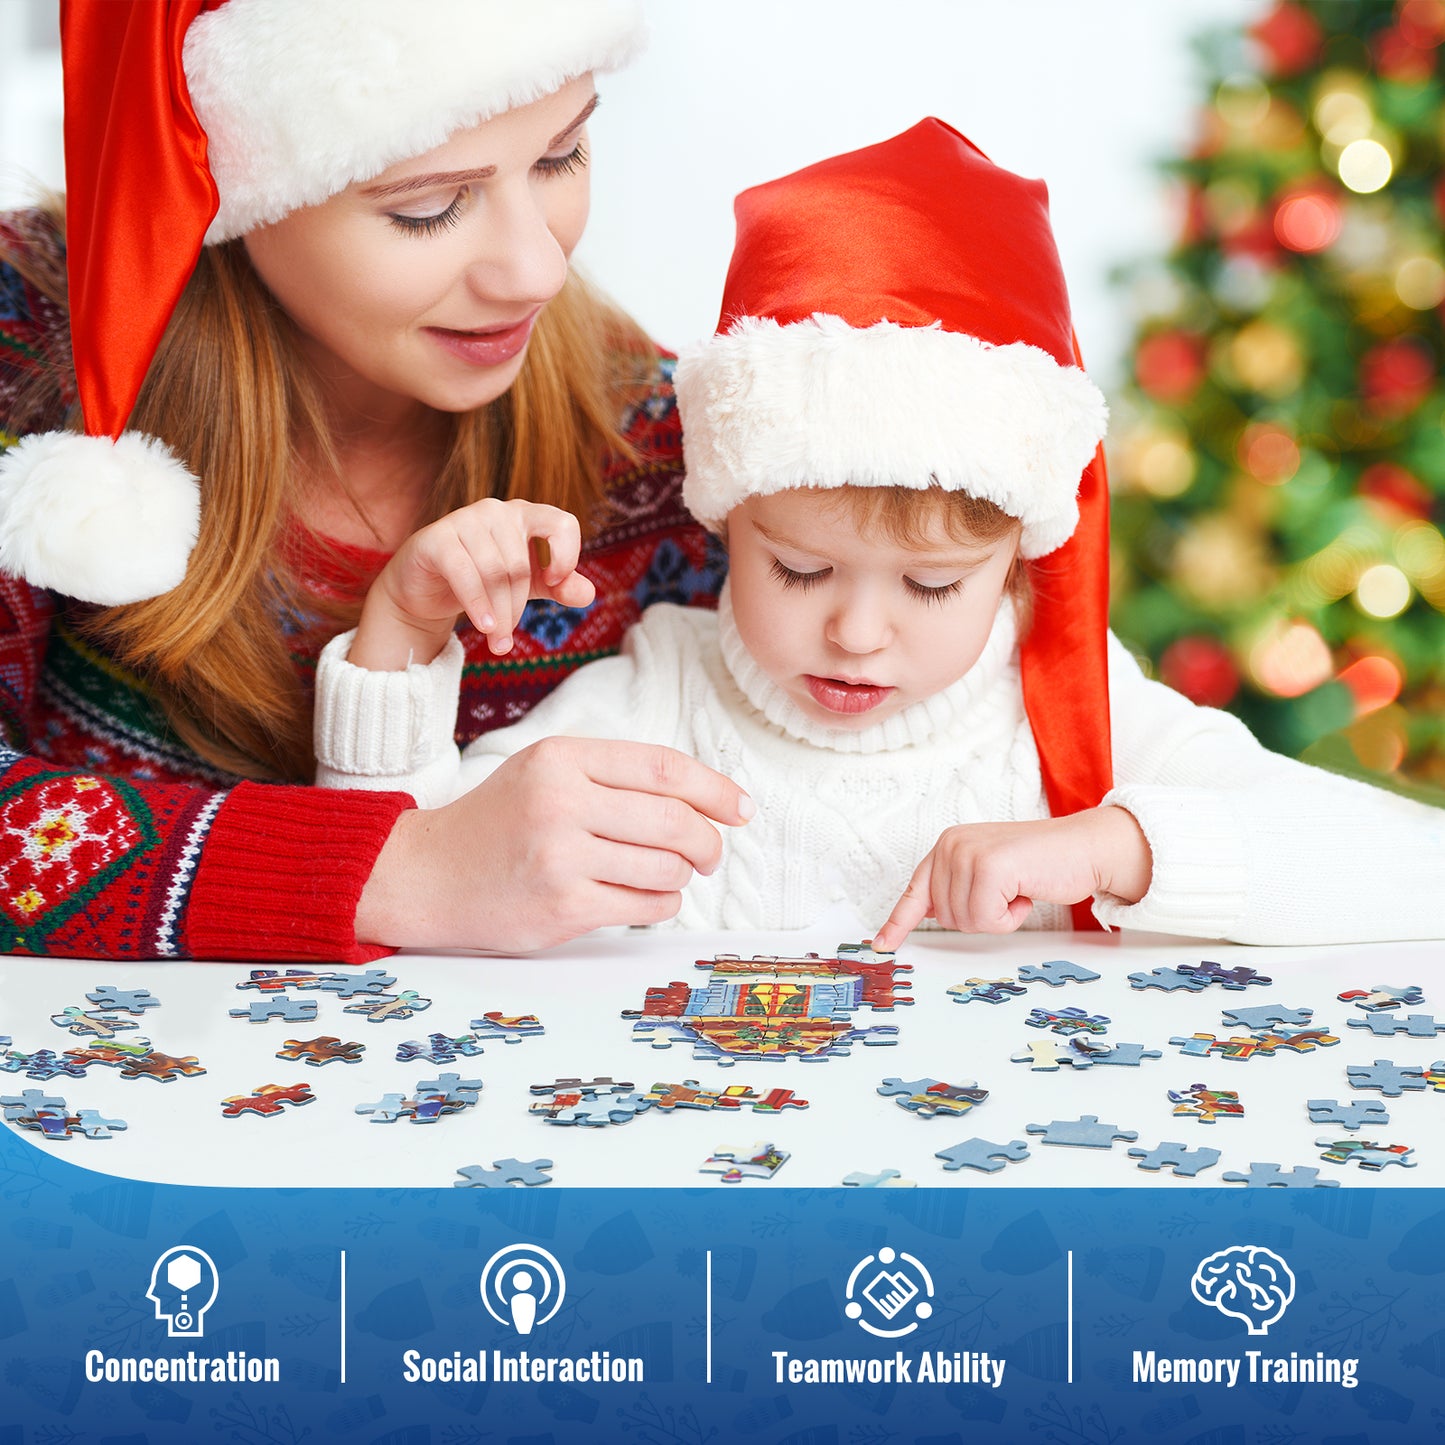 The Moment of Christmas Jigsaw Puzzles